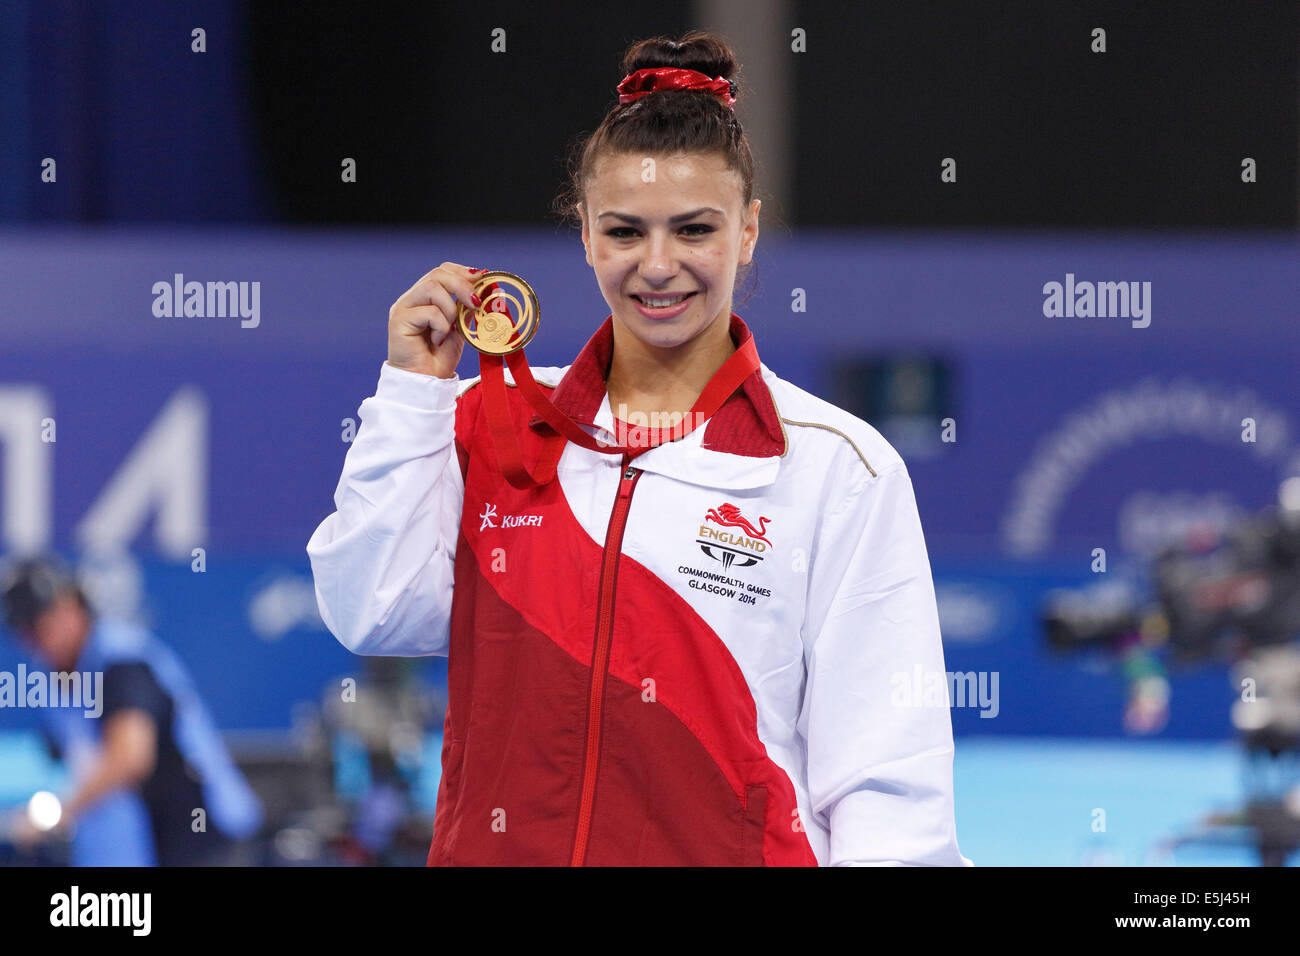 SSE Hydro, Glasgow, Scotland, UK, Friday, 1st August, 2014. Glasgow 2014 Commonwealth Games, Women’s Artistic Gymnastics Individual Floor Final, Medal Ceremony. Claudia Fragapane, England, Gold Stock Photo